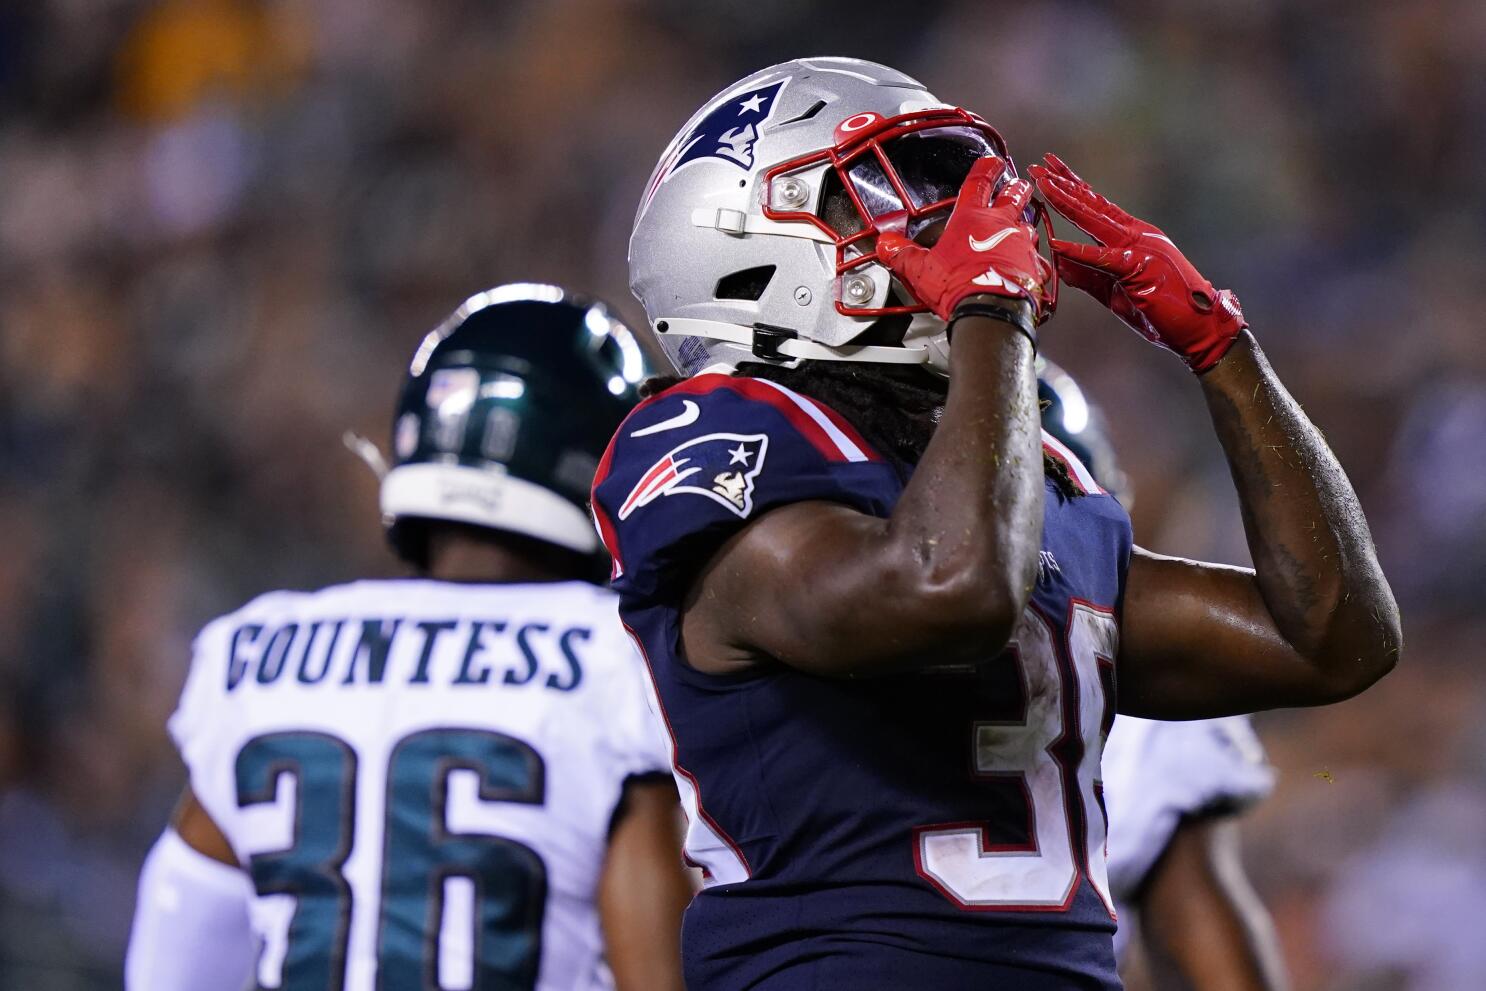 Newton, Jones star at QB for Patriots in 35-0 rout of Eagles - The